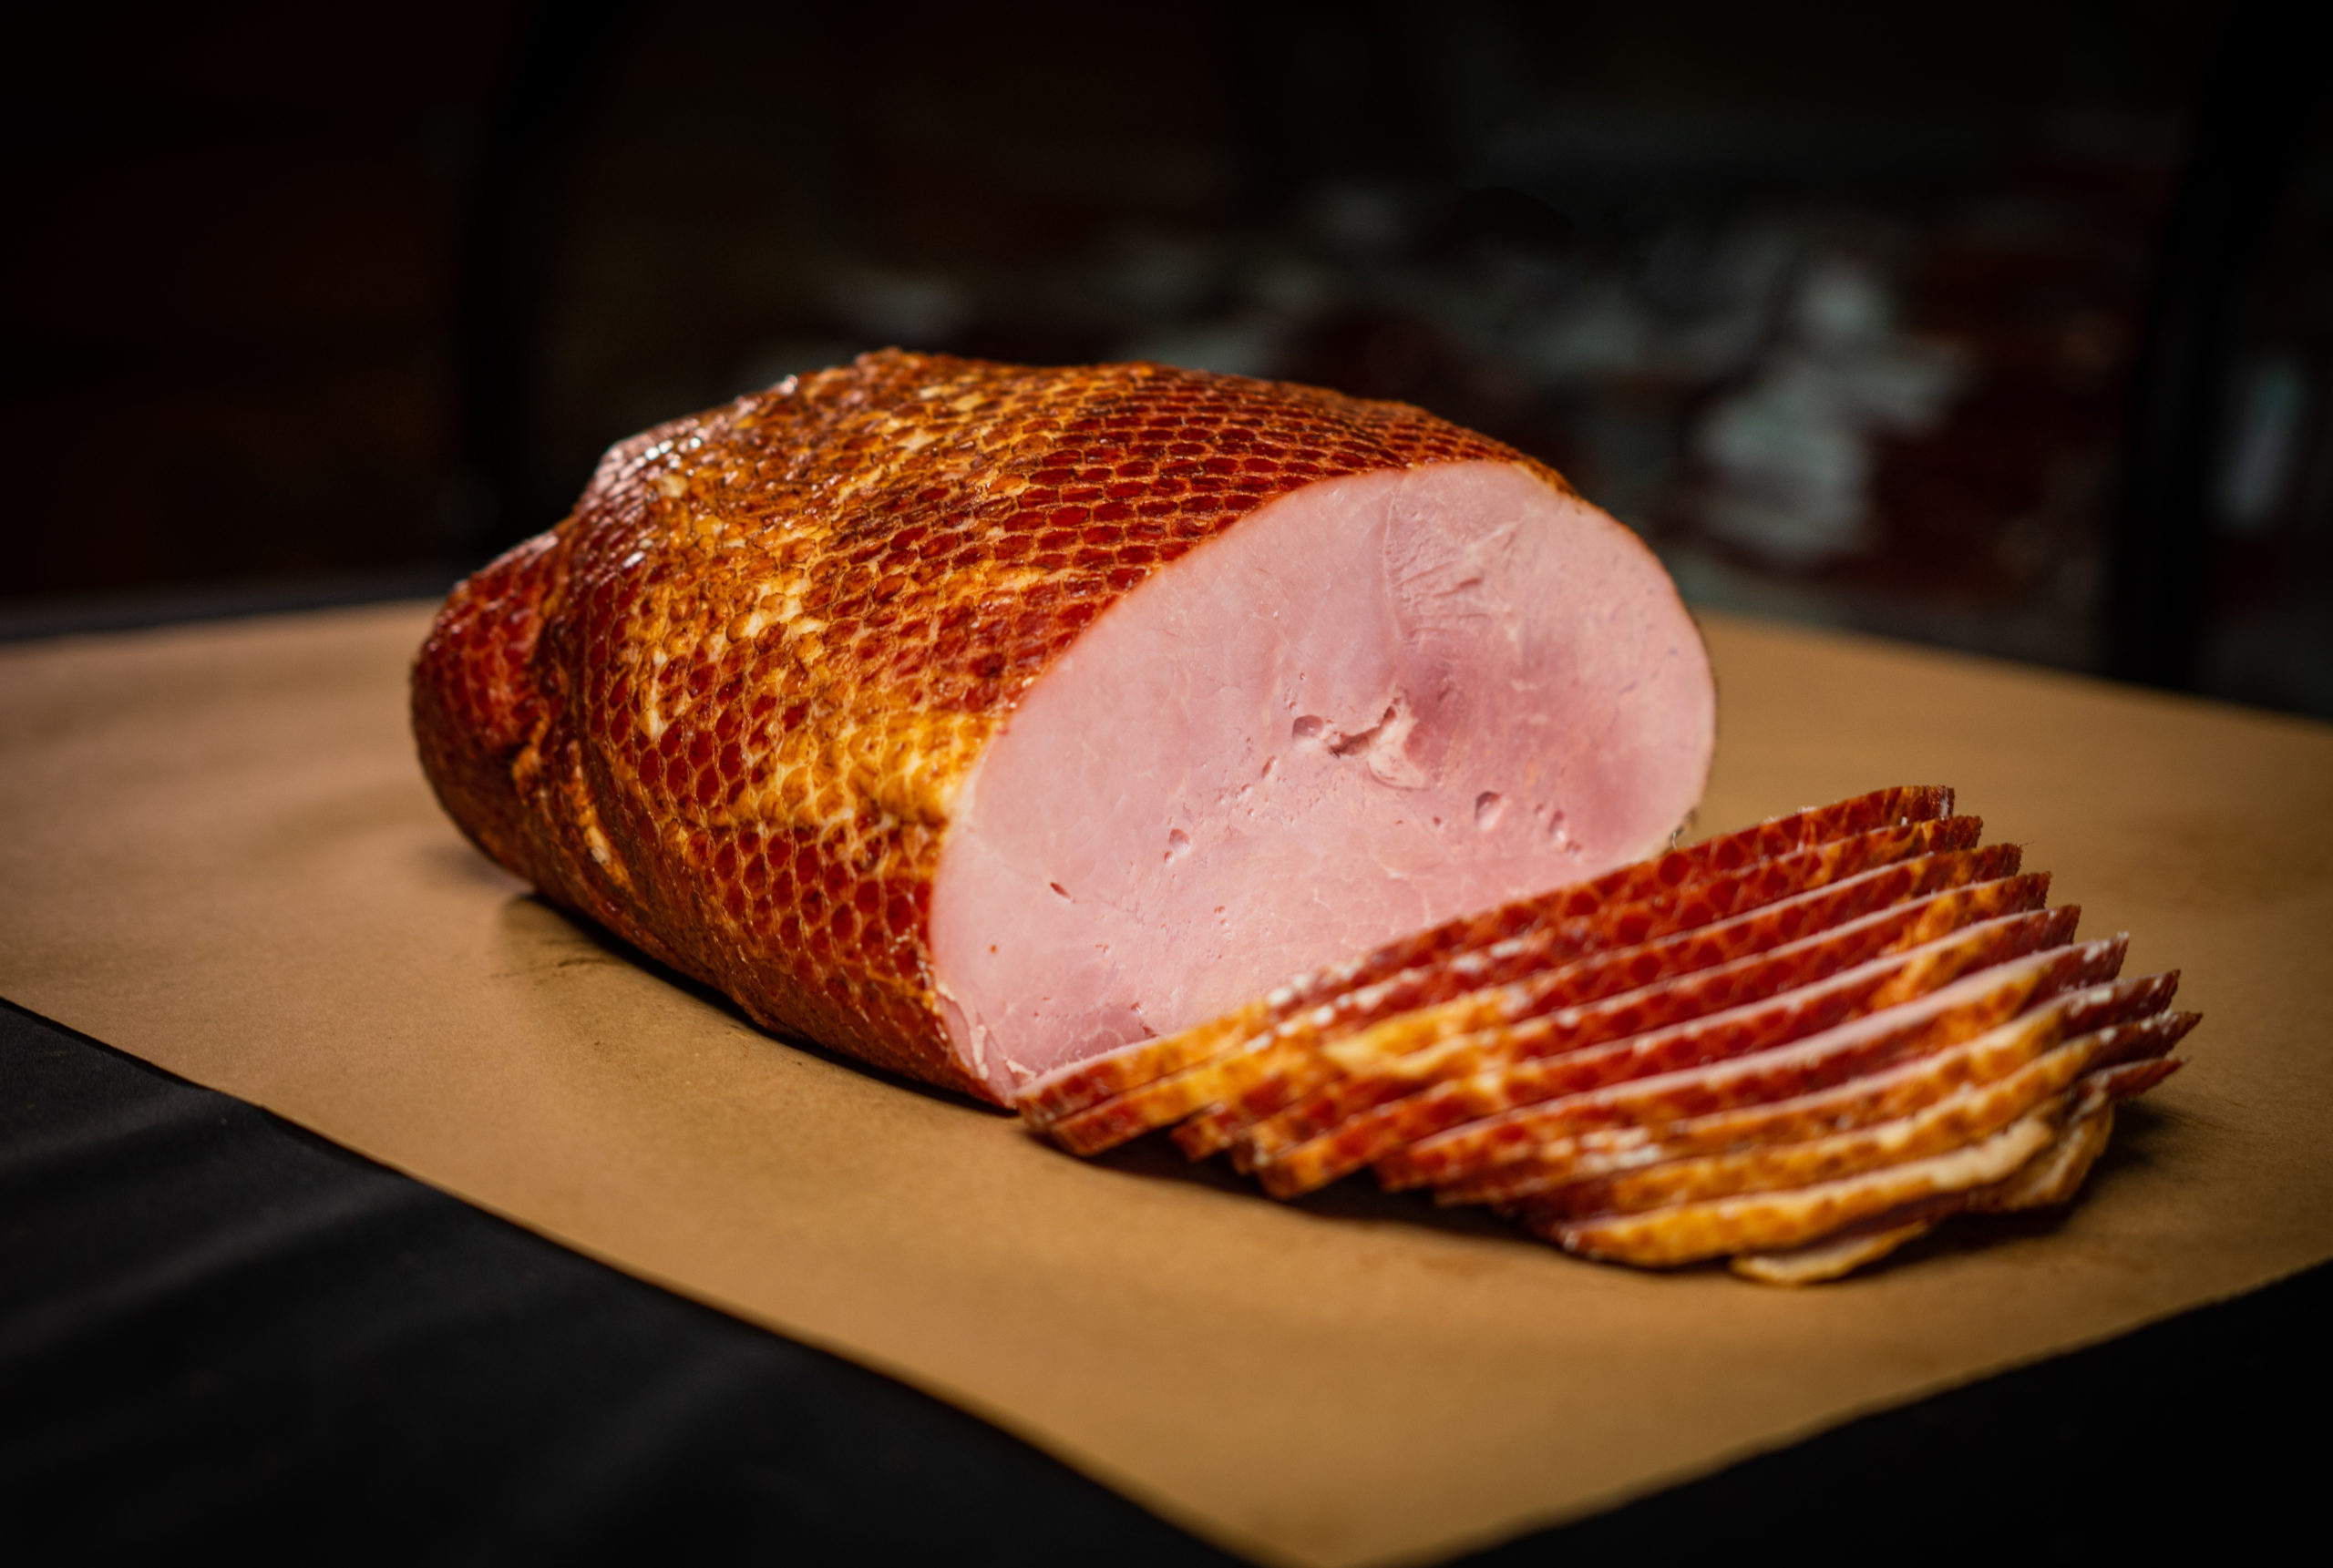 https://salmonsmeatproducts.com/wp-content/uploads/2022/01/Salmons-Specialties-Whole-Country-Smoked-Ham-sliced5-scaled.jpg